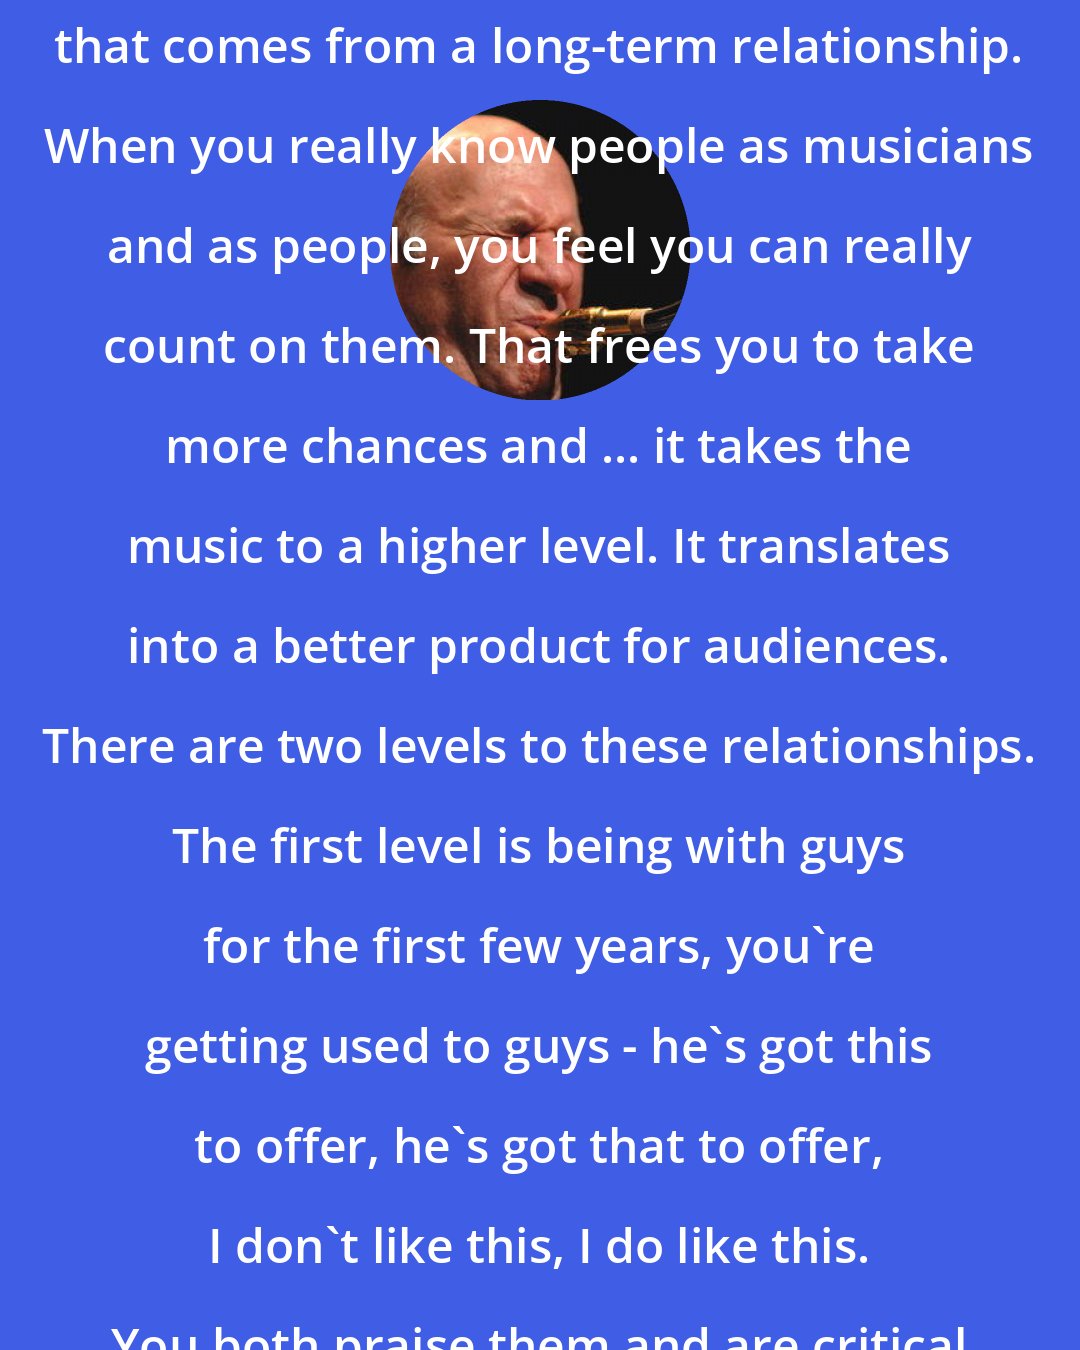 Dave Liebman: I like the communication and trust that comes from a long-term relationship. When you really know people as musicians and as people, you feel you can really count on them. That frees you to take more chances and ... it takes the music to a higher level. It translates into a better product for audiences. There are two levels to these relationships. The first level is being with guys for the first few years, you're getting used to guys - he's got this to offer, he's got that to offer, I don't like this, I do like this. You both praise them and are critical as you get to know one another.